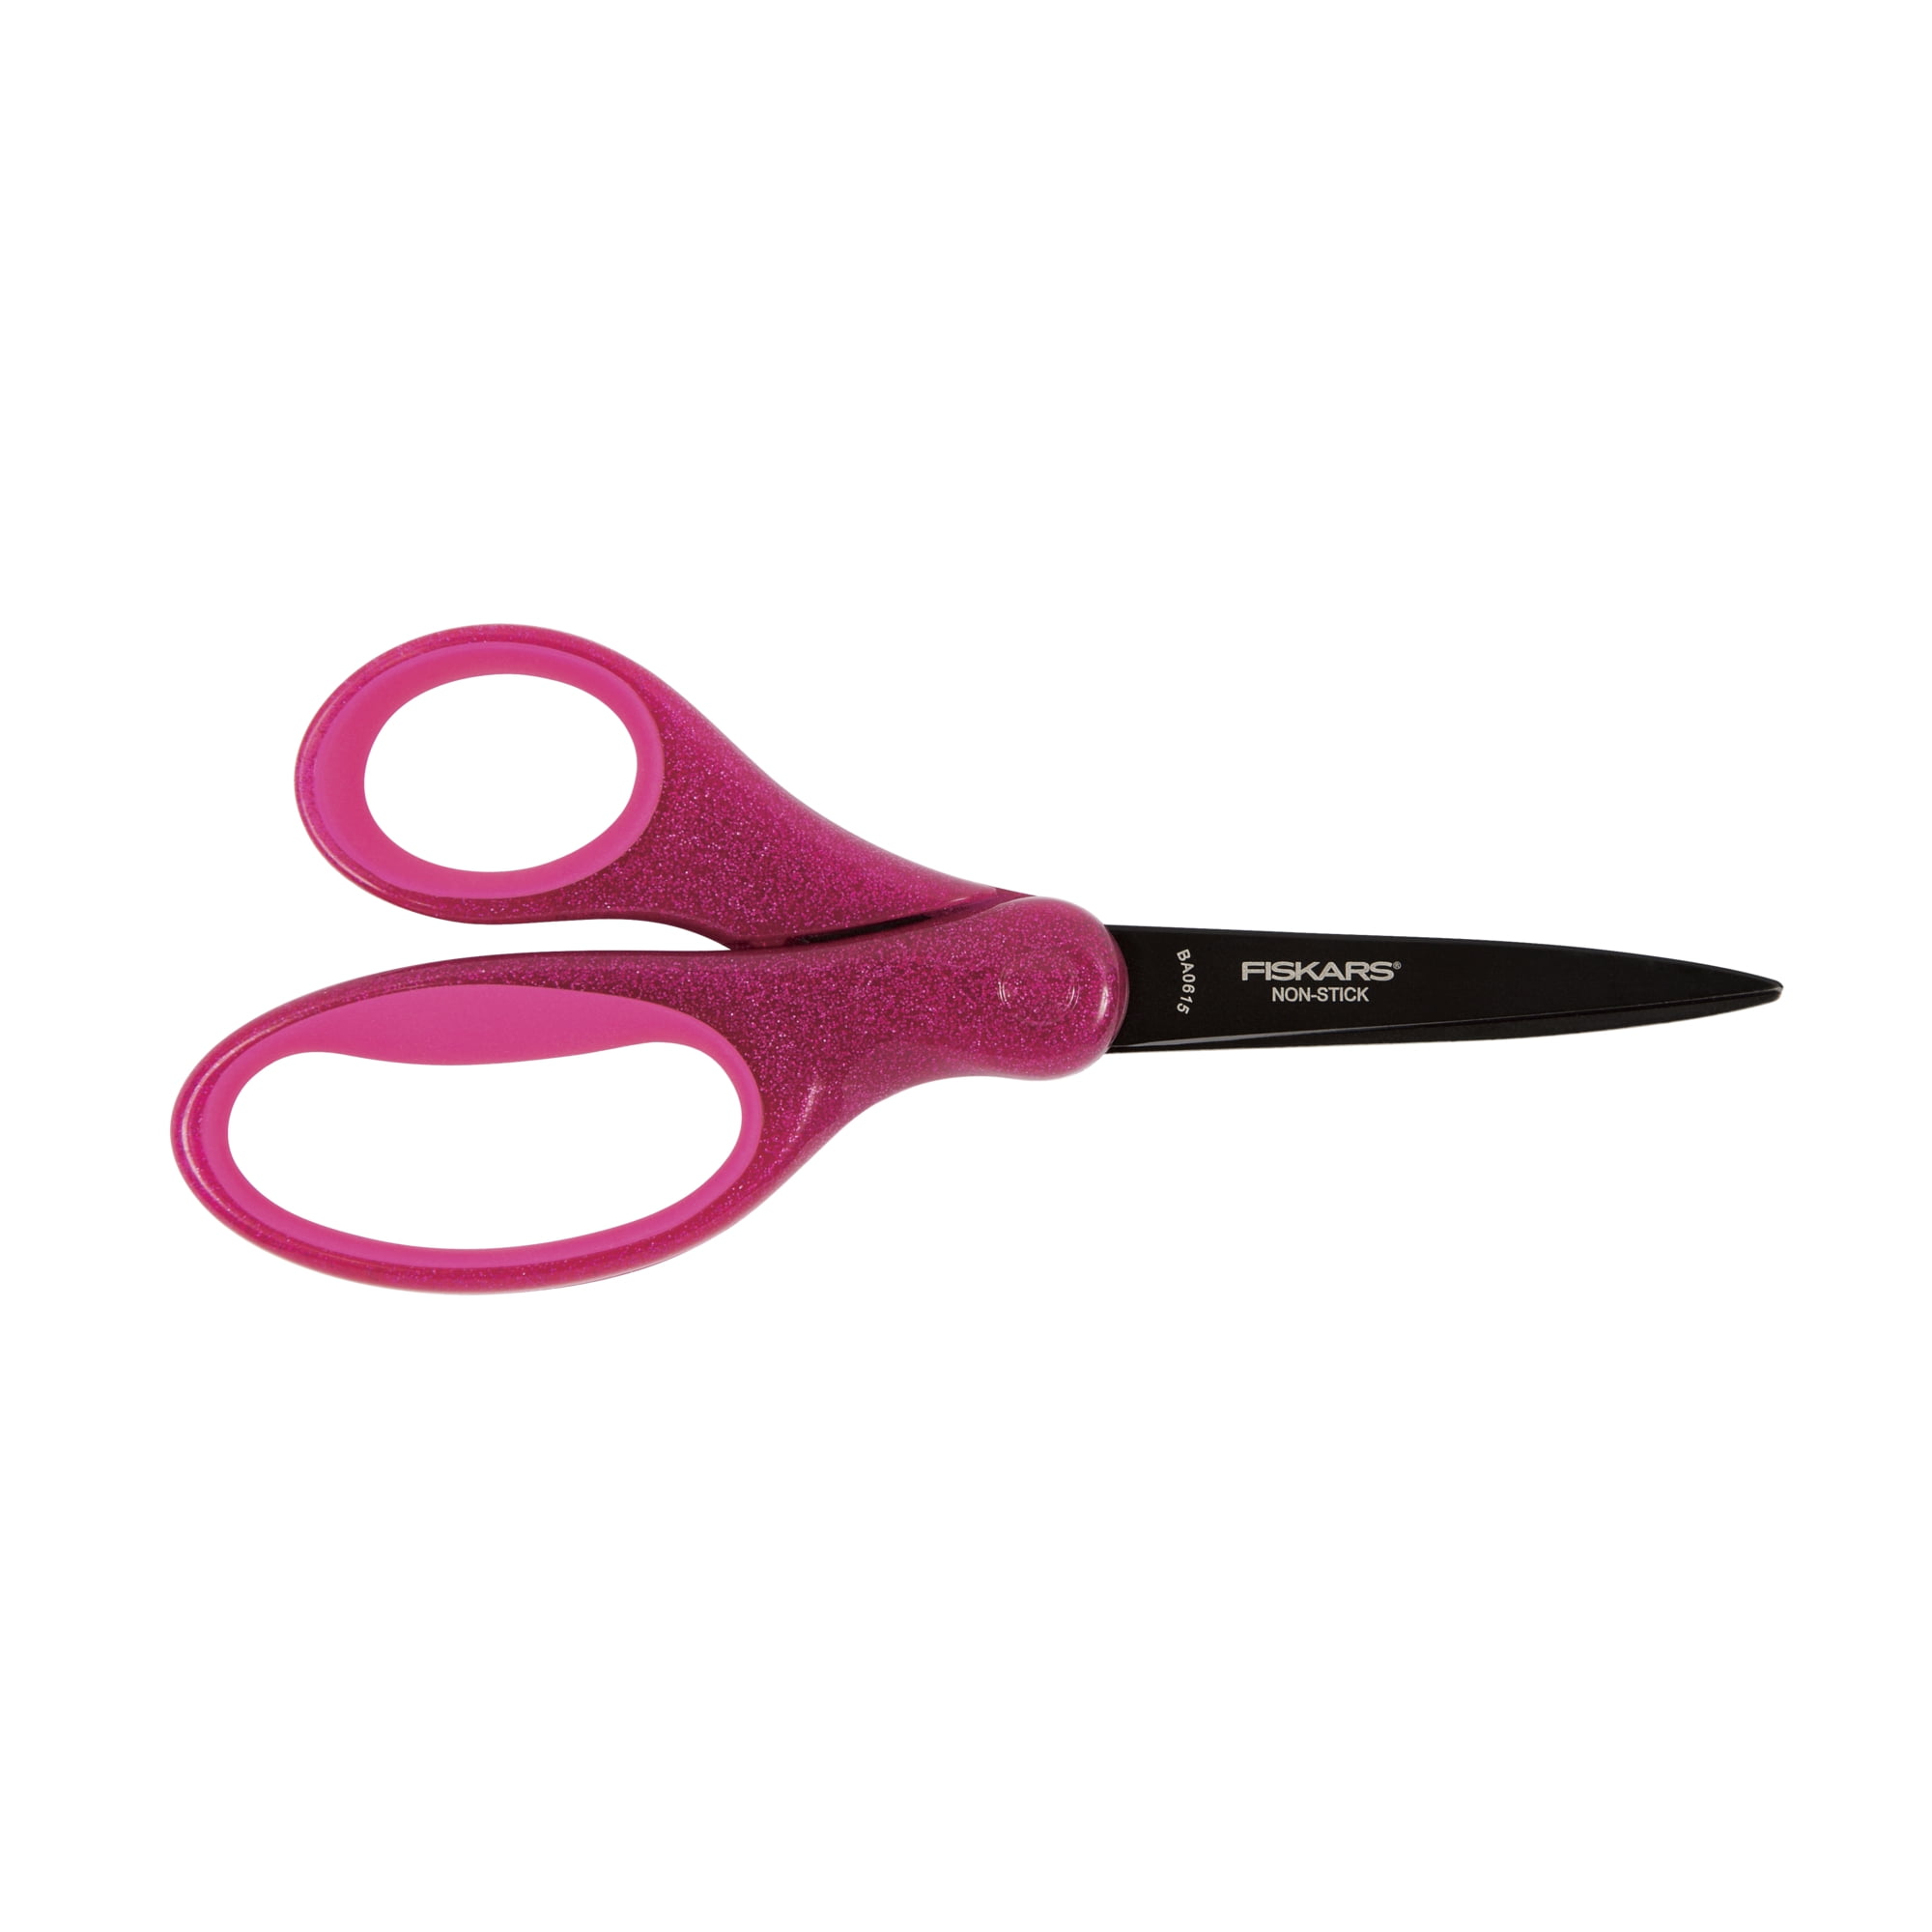 Scotch 8 Precision Scissors Limited Edition Great for Everyday Use 1448 